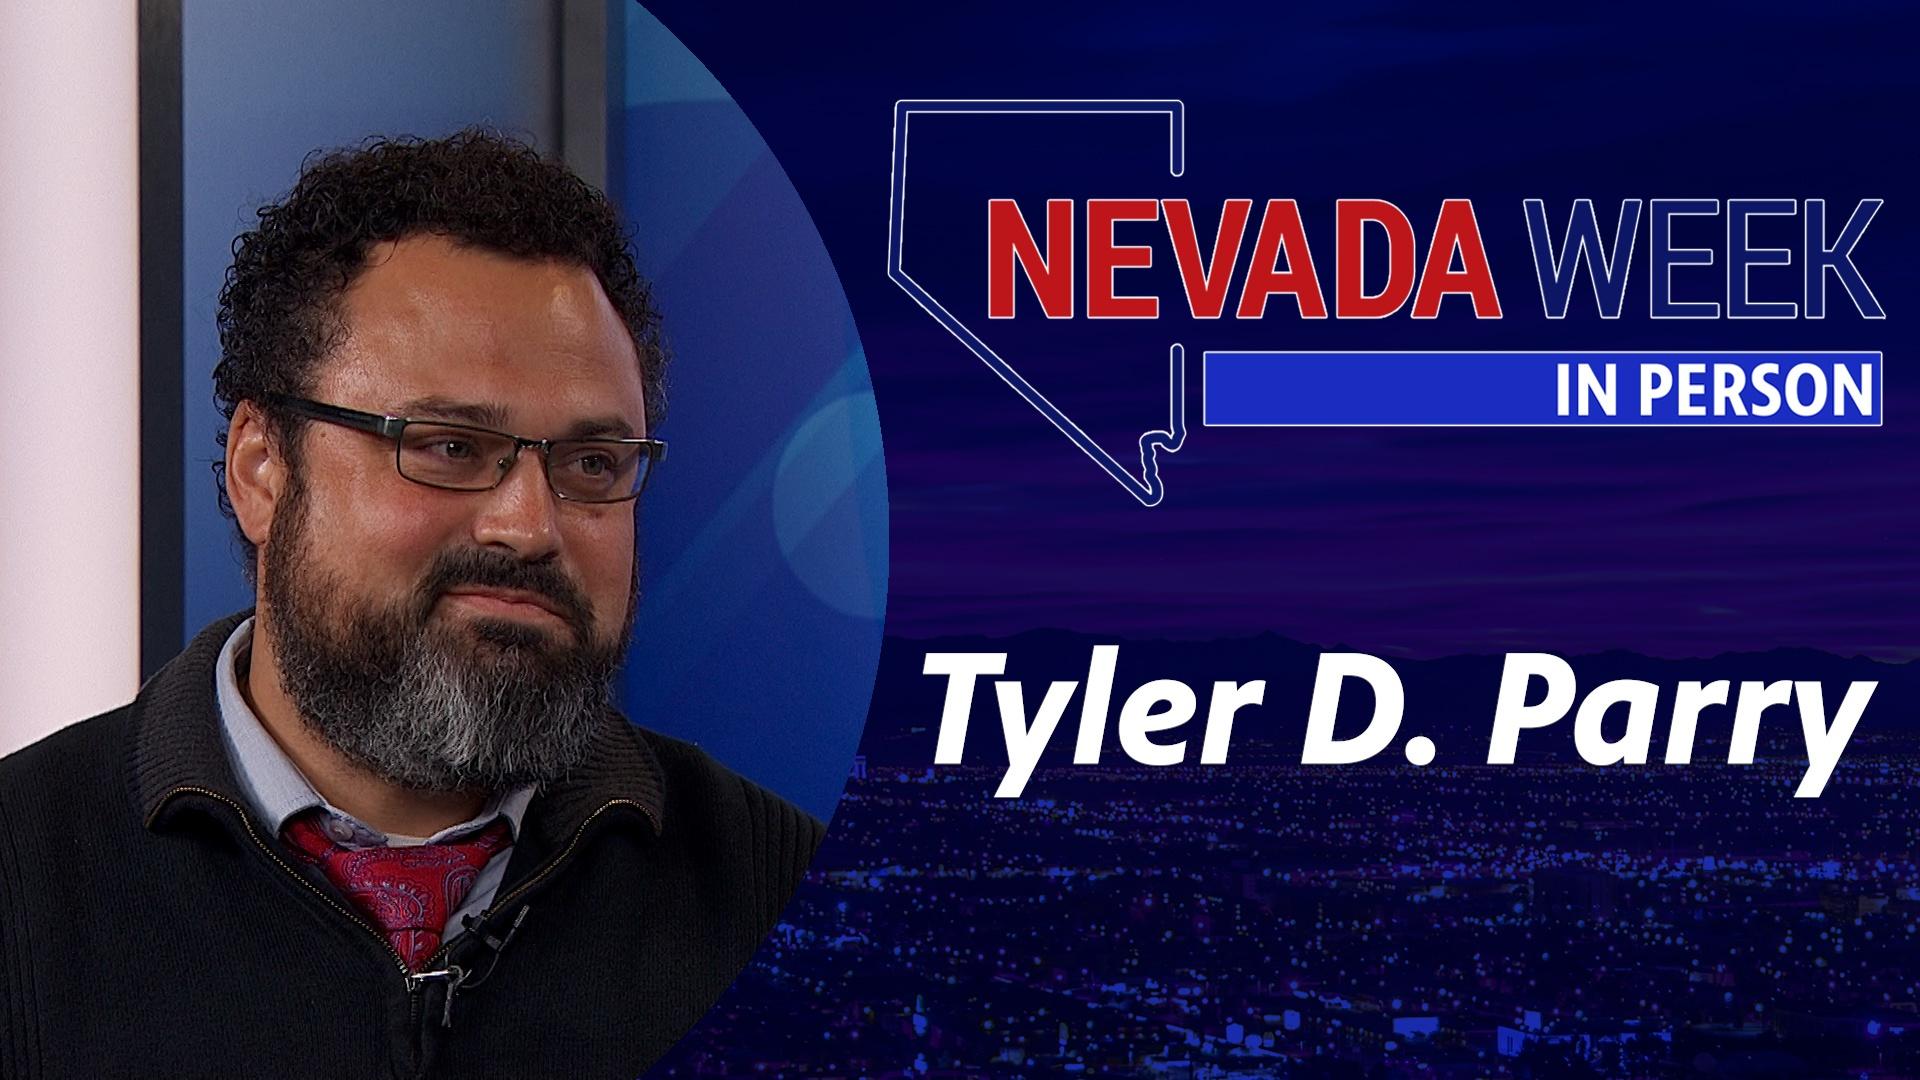 Nevada Week In Person | 	Tyler D. Parry